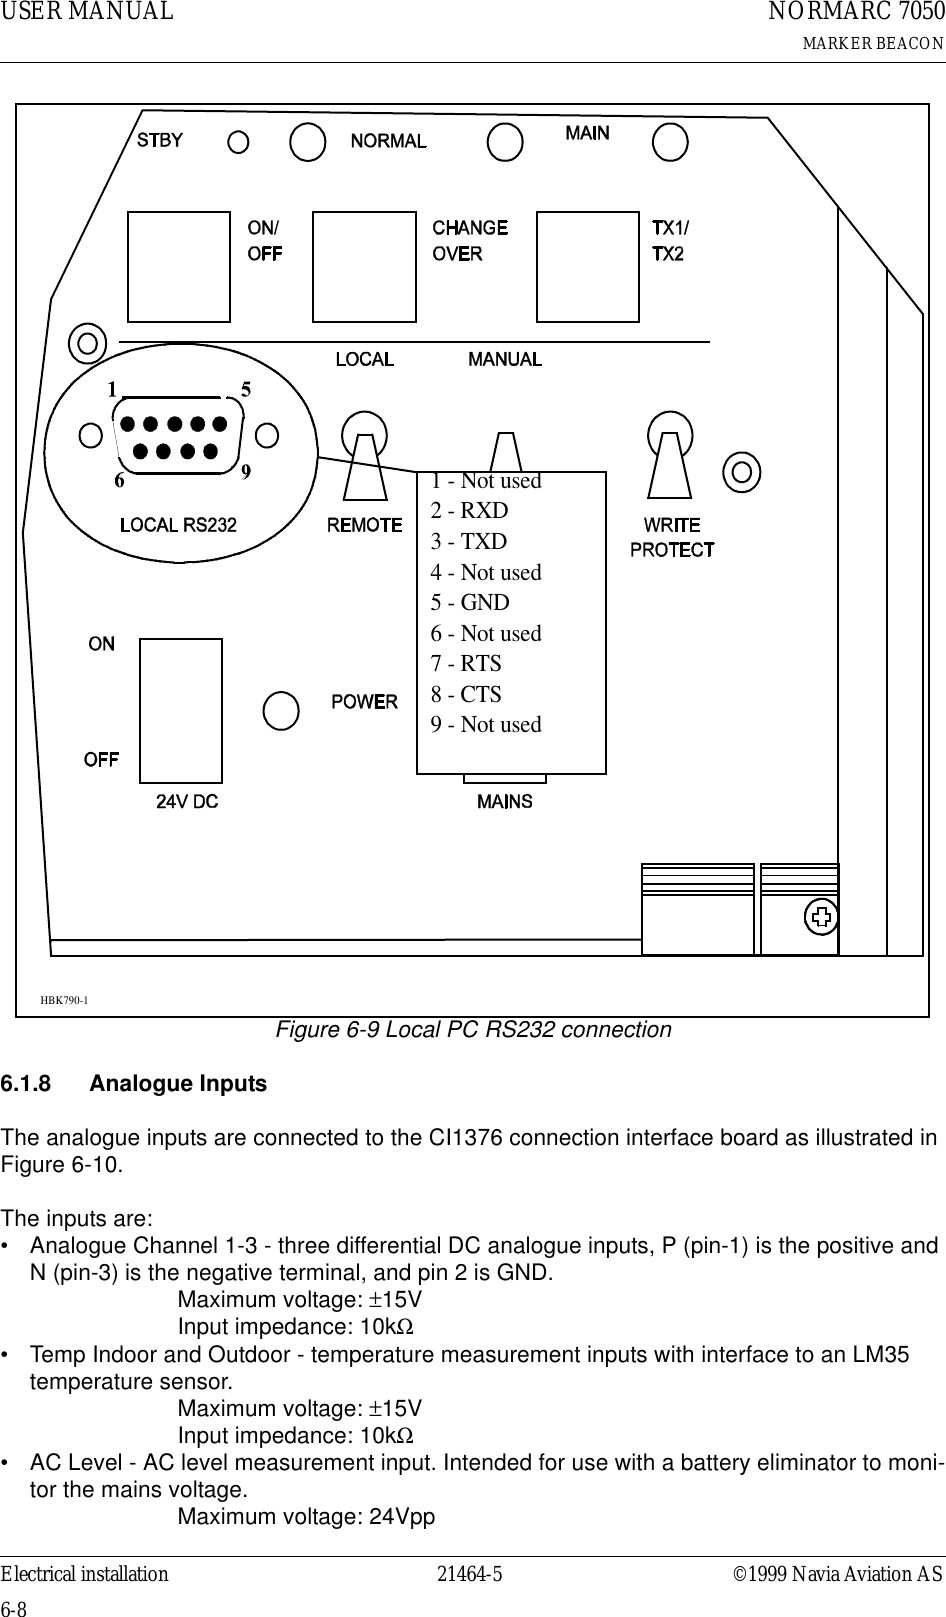 USER MANUAL6-821464-5NORMARC 7050MARKER BEACONElectrical installation ©1999 Navia Aviation ASFigure 6-9 Local PC RS232 connection6.1.8 Analogue InputsThe analogue inputs are connected to the CI1376 connection interface board as illustrated in Figure 6-10.The inputs are:• Analogue Channel 1-3 - three differential DC analogue inputs, P (pin-1) is the positive and N (pin-3) is the negative terminal, and pin 2 is GND.Maximum voltage: ±15VInput impedance: 10kΩ• Temp Indoor and Outdoor - temperature measurement inputs with interface to an LM35 temperature sensor.Maximum voltage: ±15VInput impedance: 10kΩ• AC Level - AC level measurement input. Intended for use with a battery eliminator to moni-tor the mains voltage.Maximum voltage: 24Vpp1 - Not used2 - RXD3 - TXD4 - Not used5 - GND6 - Not used7 - RTS8 - CTS9 - Not usedHBK790-1